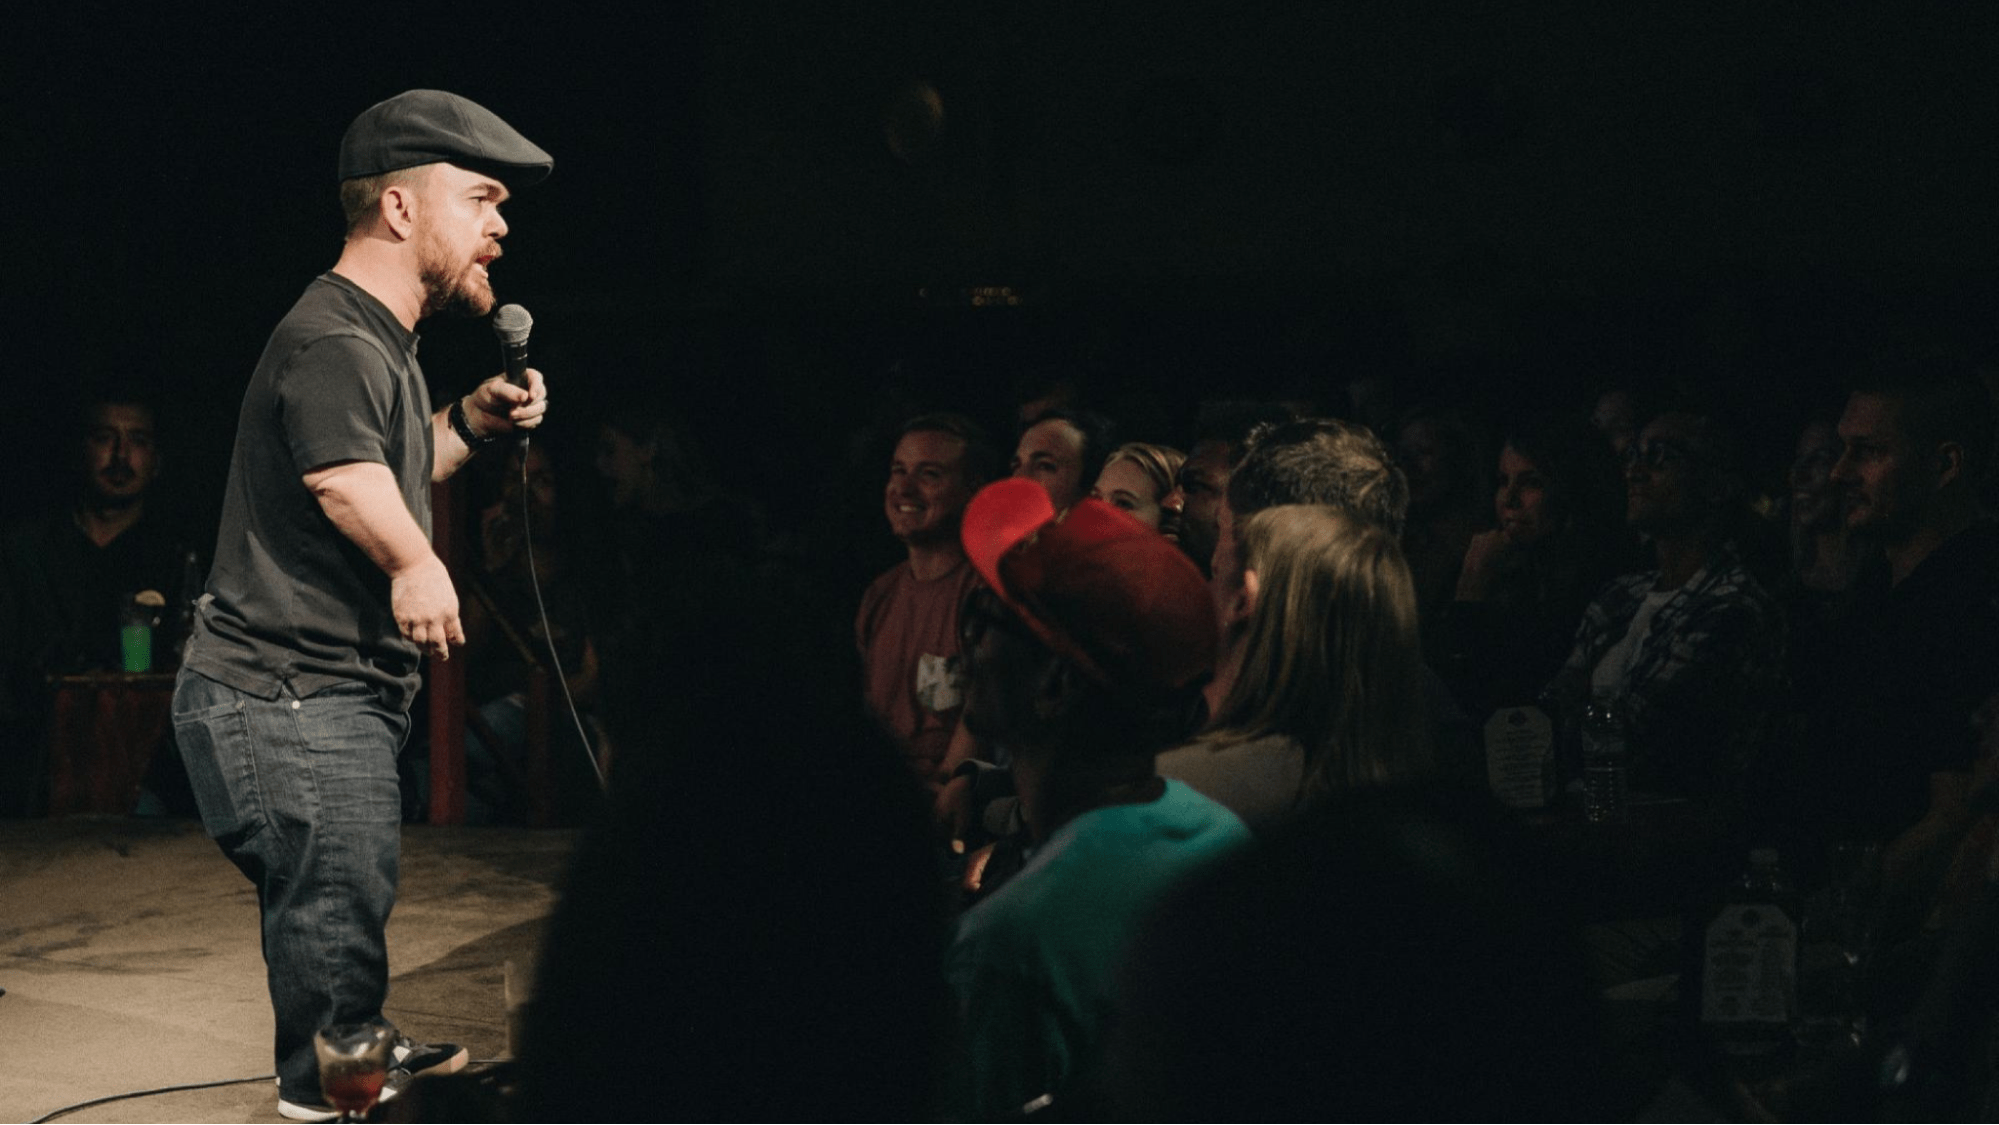 A standup comedian performing